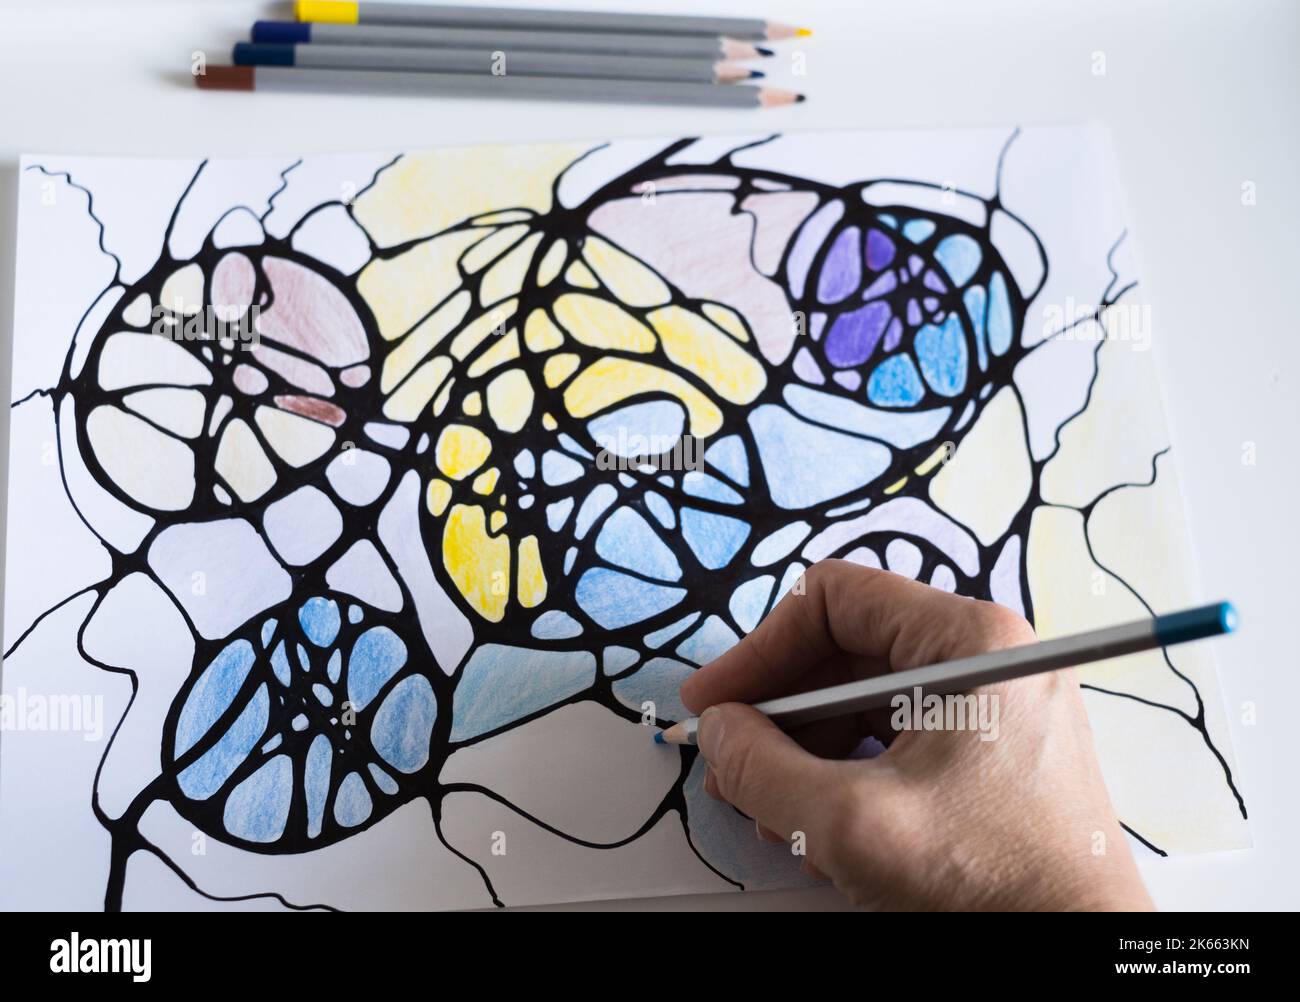 A woman draws a neurographic drawing on paper with color pencils. Neurographic art is an easy way to work with the subconscious mind through drawing. Stock Photo